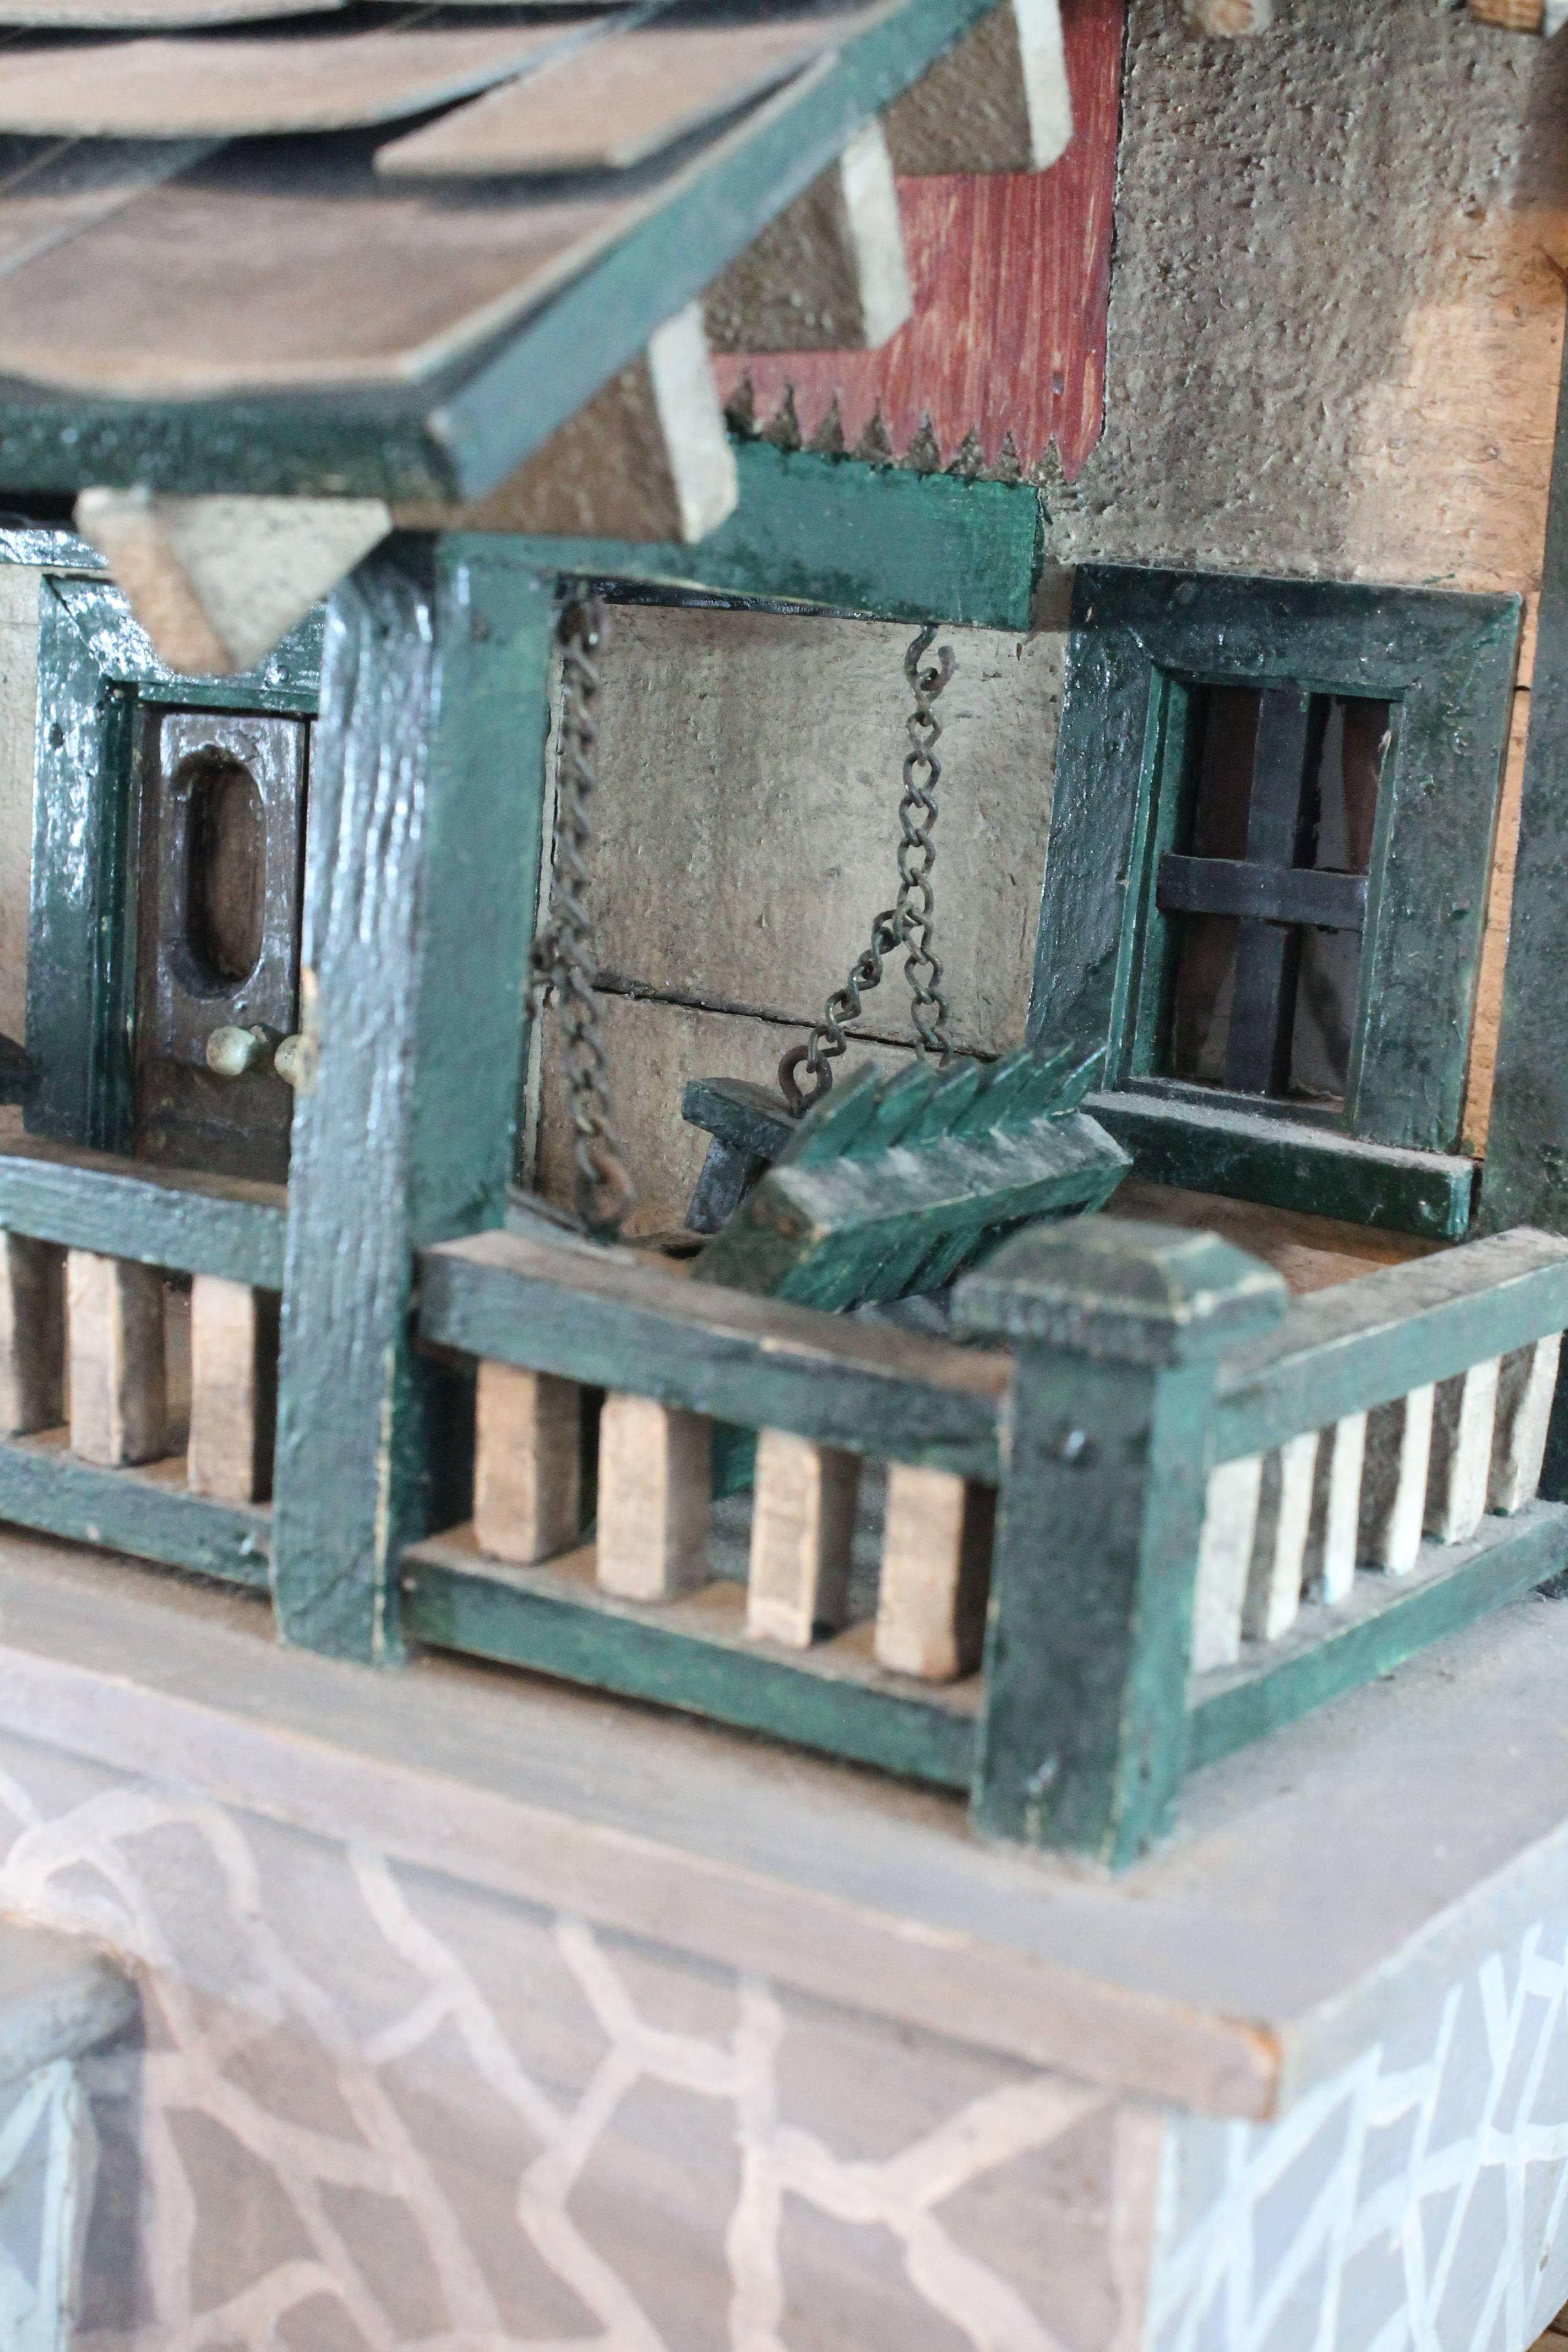 Exceptional Folk Art handmade architectural model from the early 20th century.
The front porch is complete with a swing. Great hand-painted faux stone fronted deck and stairs. Wonderful simple architectural details from the front doors to the